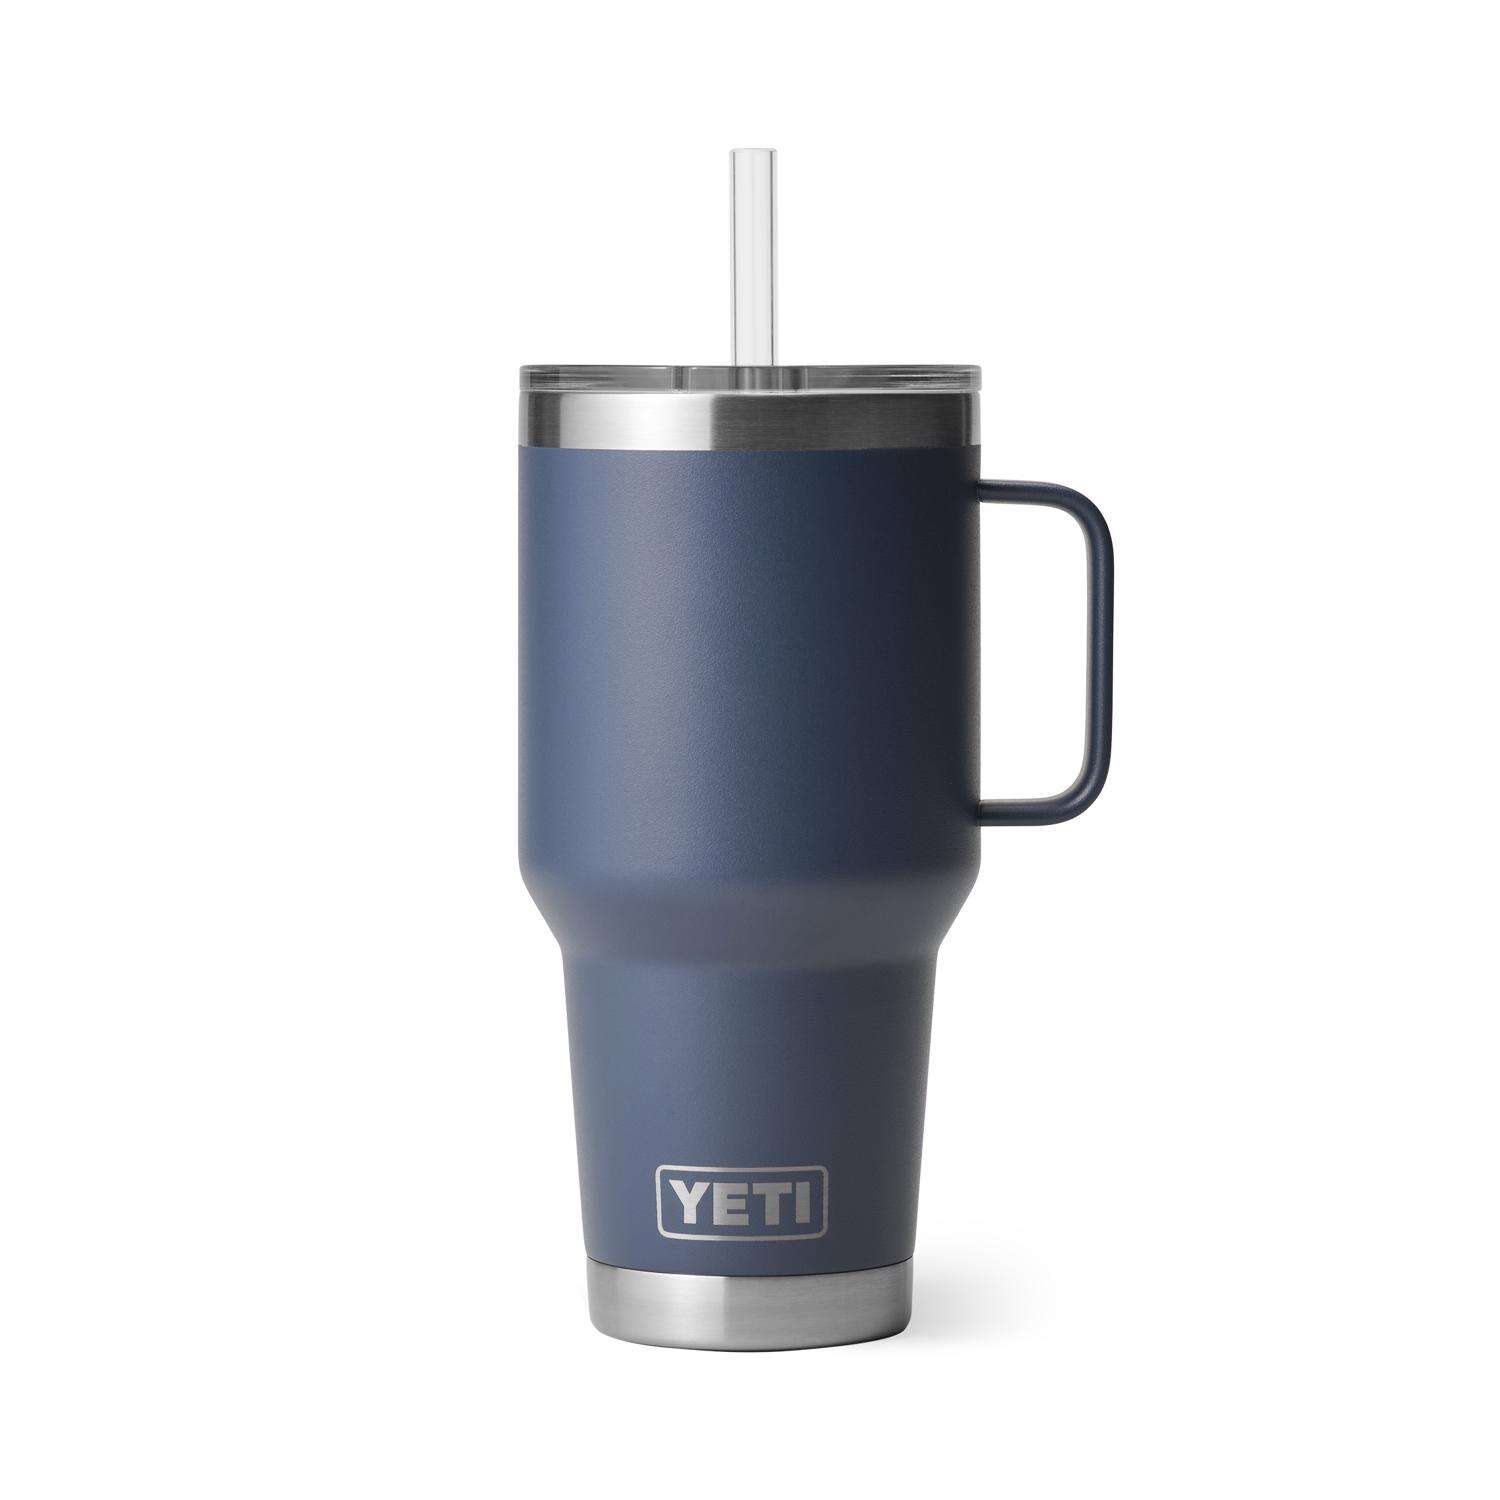 Why Are Yeti Tumbler Cups So Expensive?